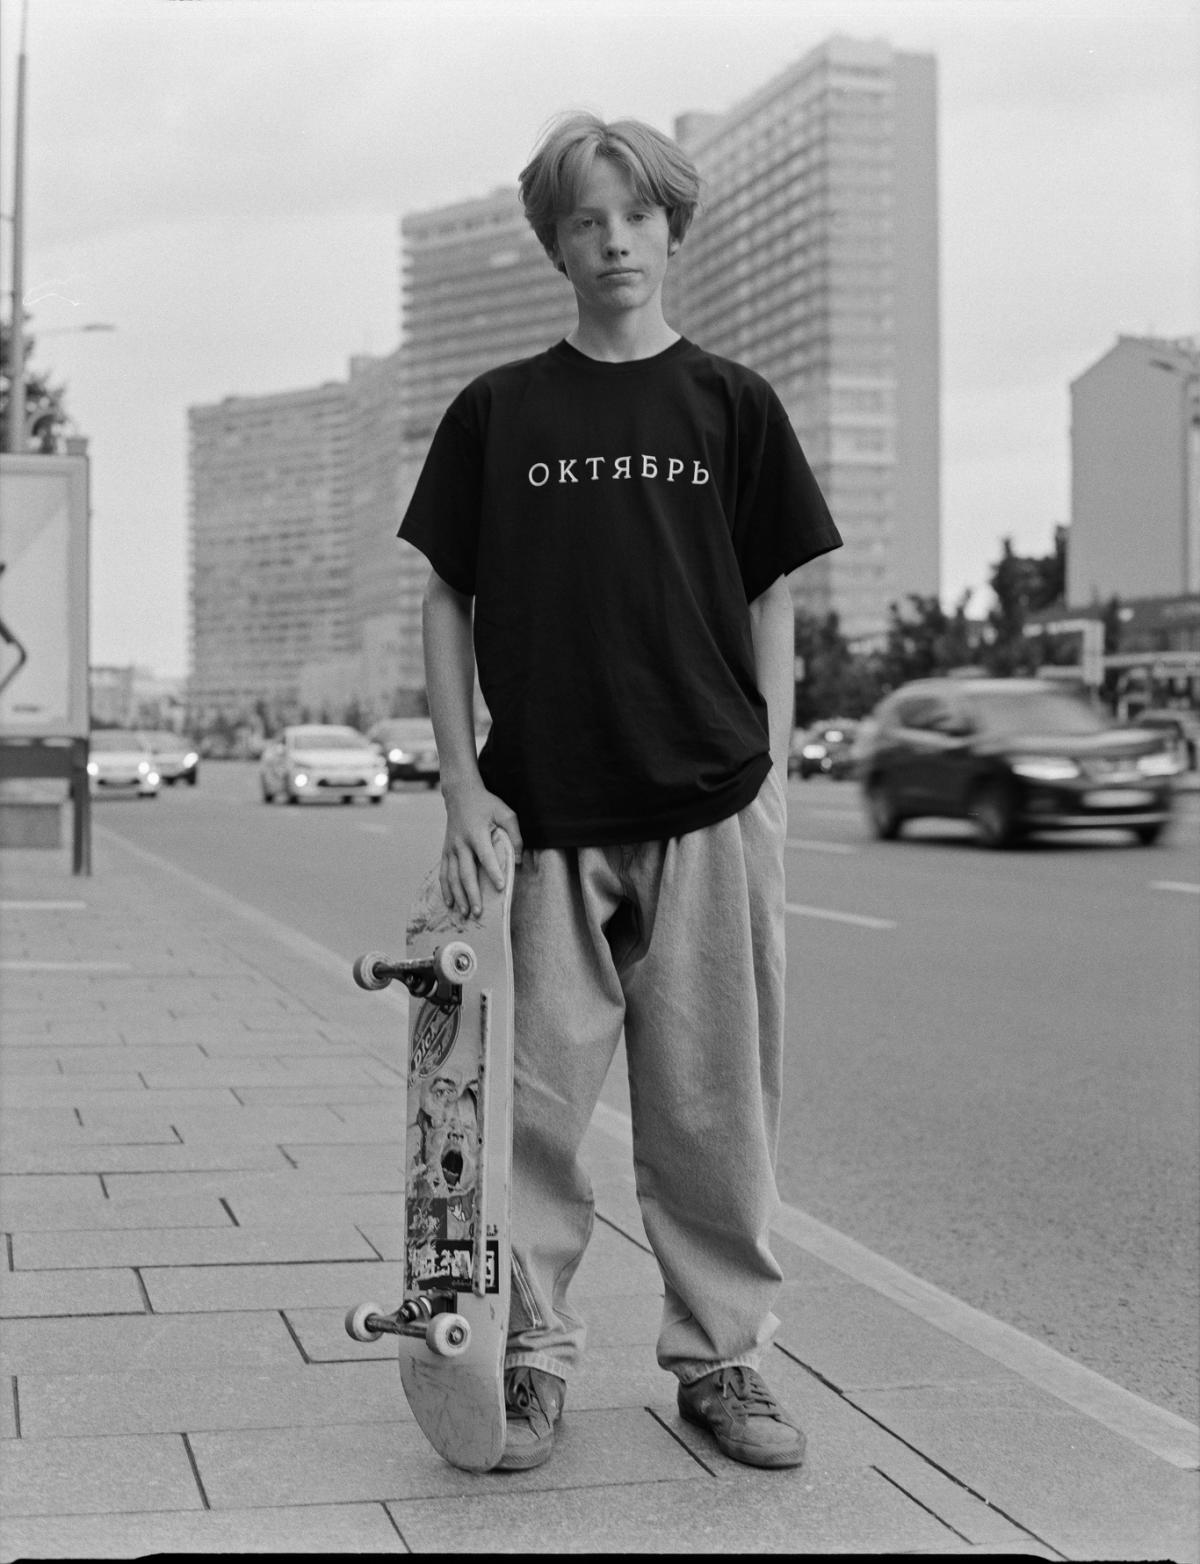 Louis Vuitton x Supreme: the world's coolest skate-inspired